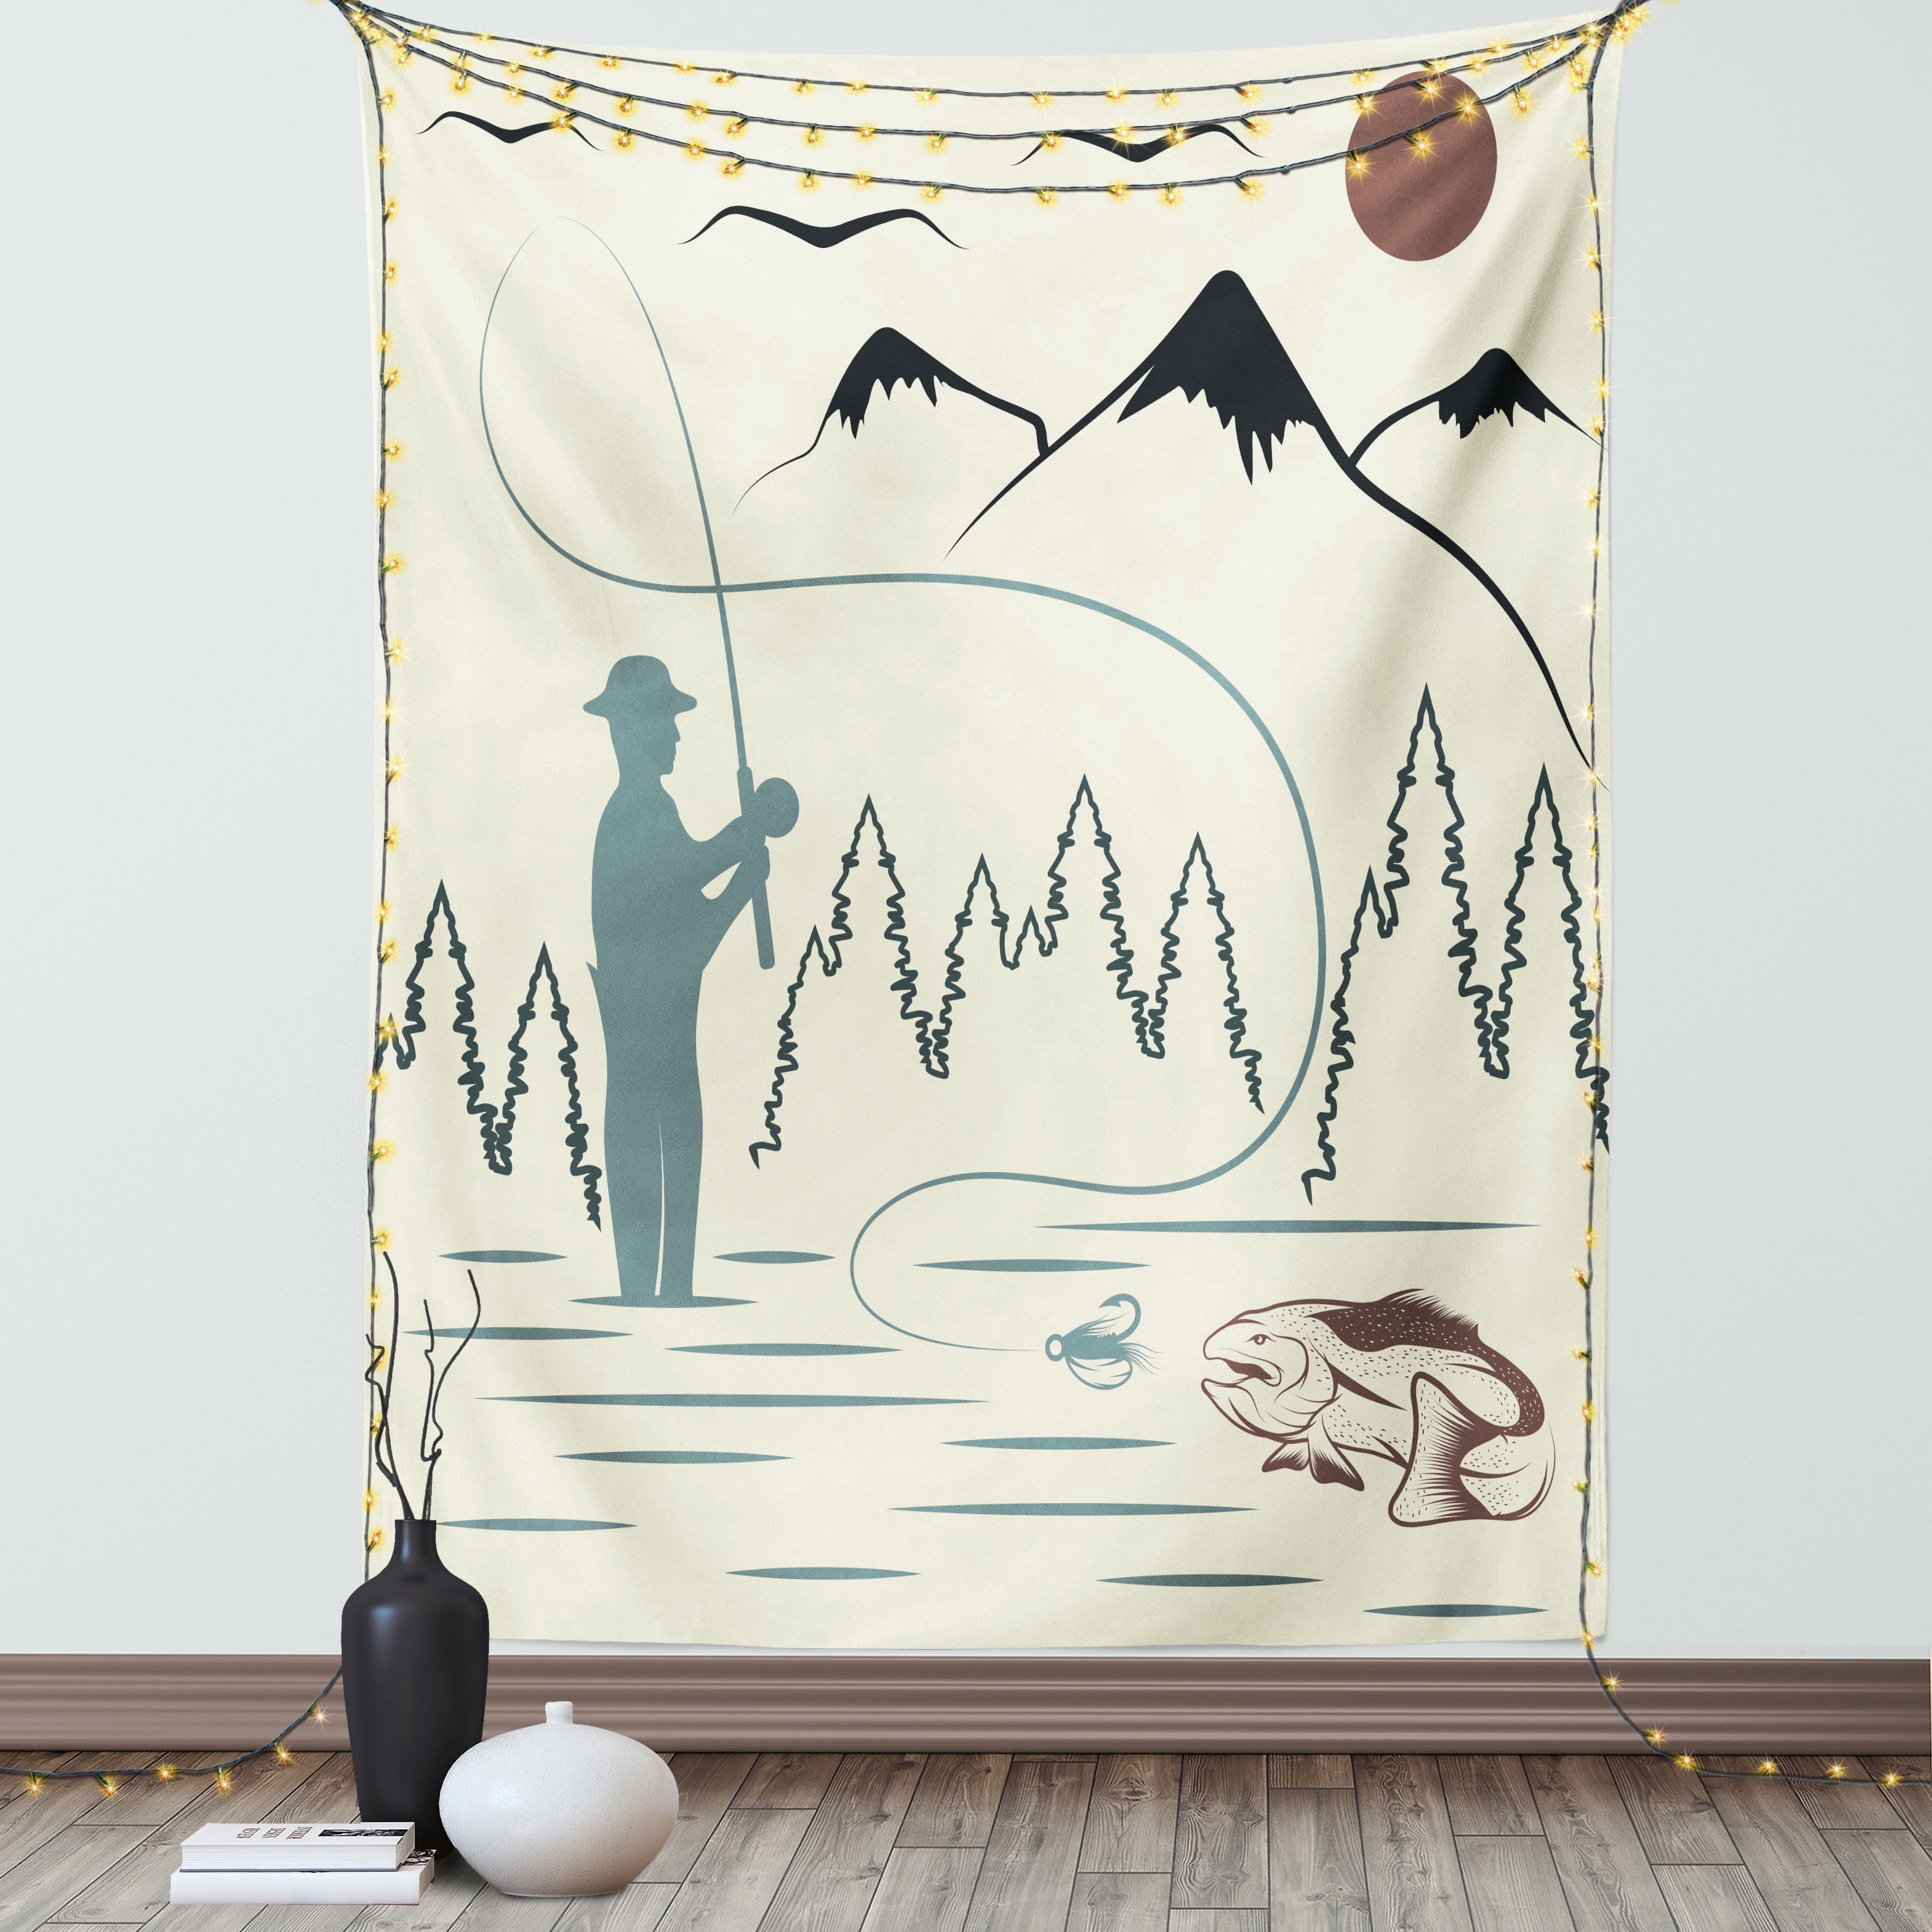 Fishing Theme Tapestry, Man Try to Catch Monster Fish in River with  Mountains Sun and Trees, Wall Hanging for Bedroom Living Room Dorm Decor,  60W X